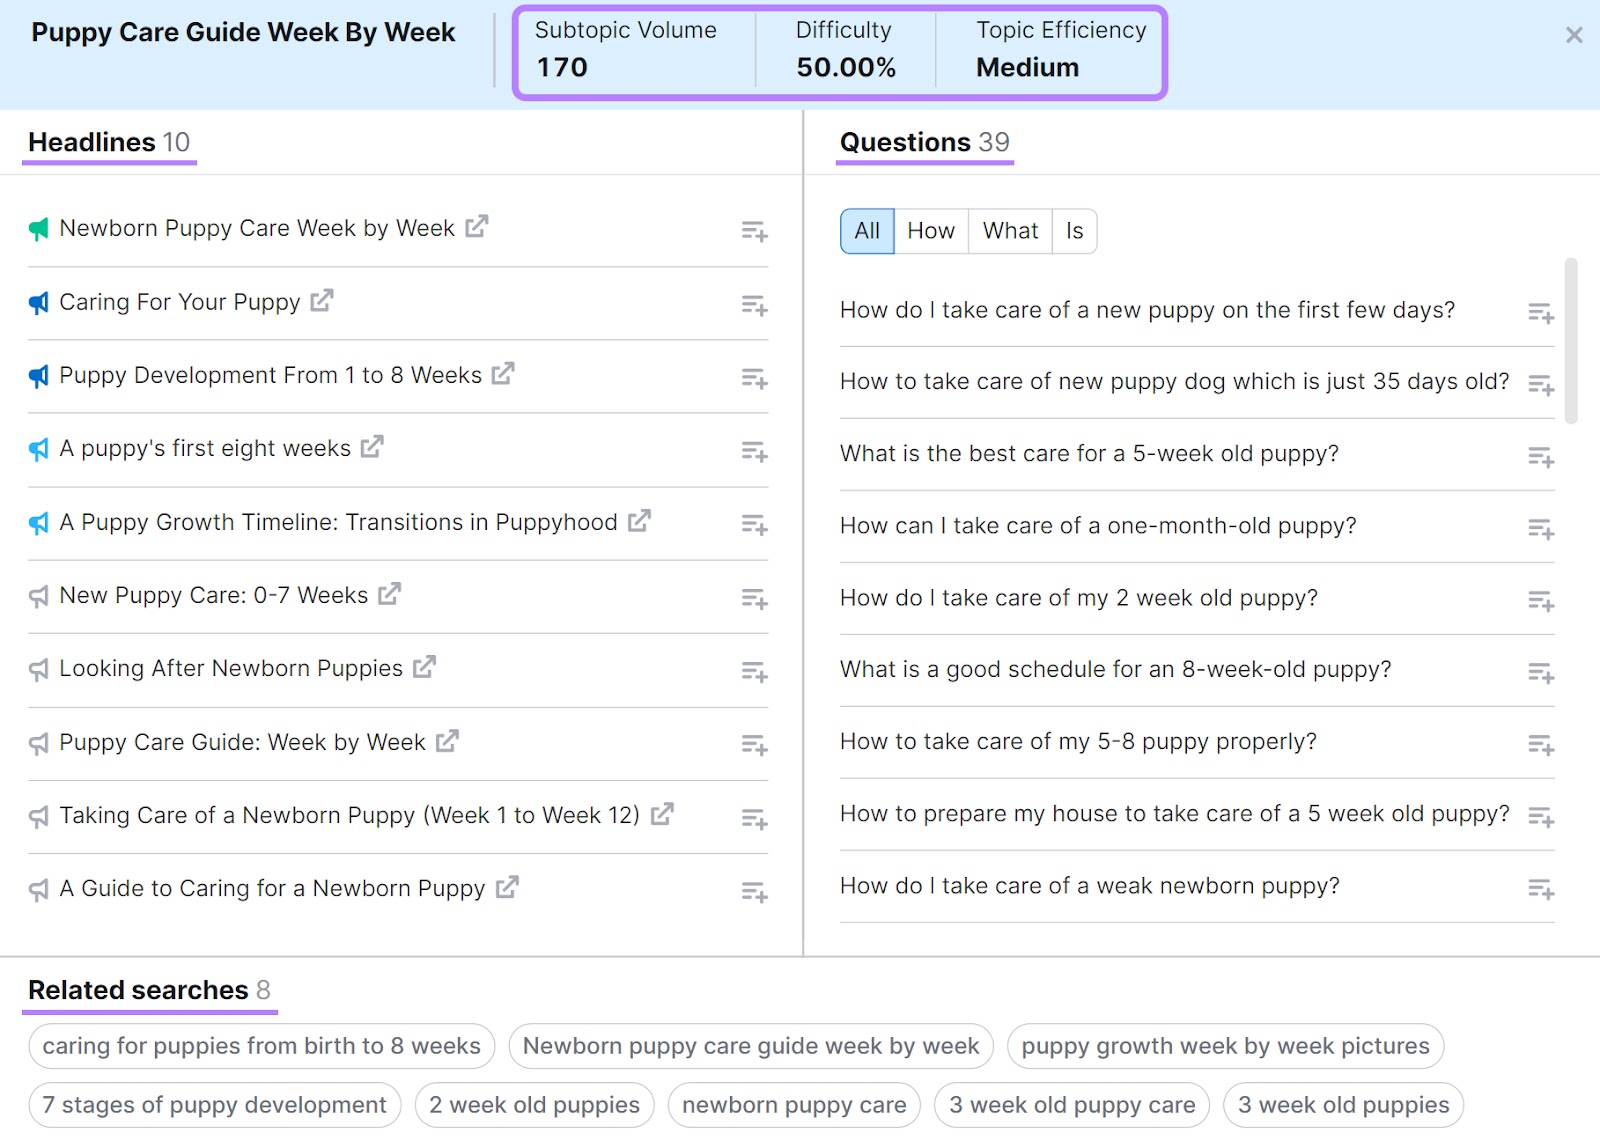 Headlines, questions, and related searches shown for "Puppy care guide week by week" topic in Topic Research tool